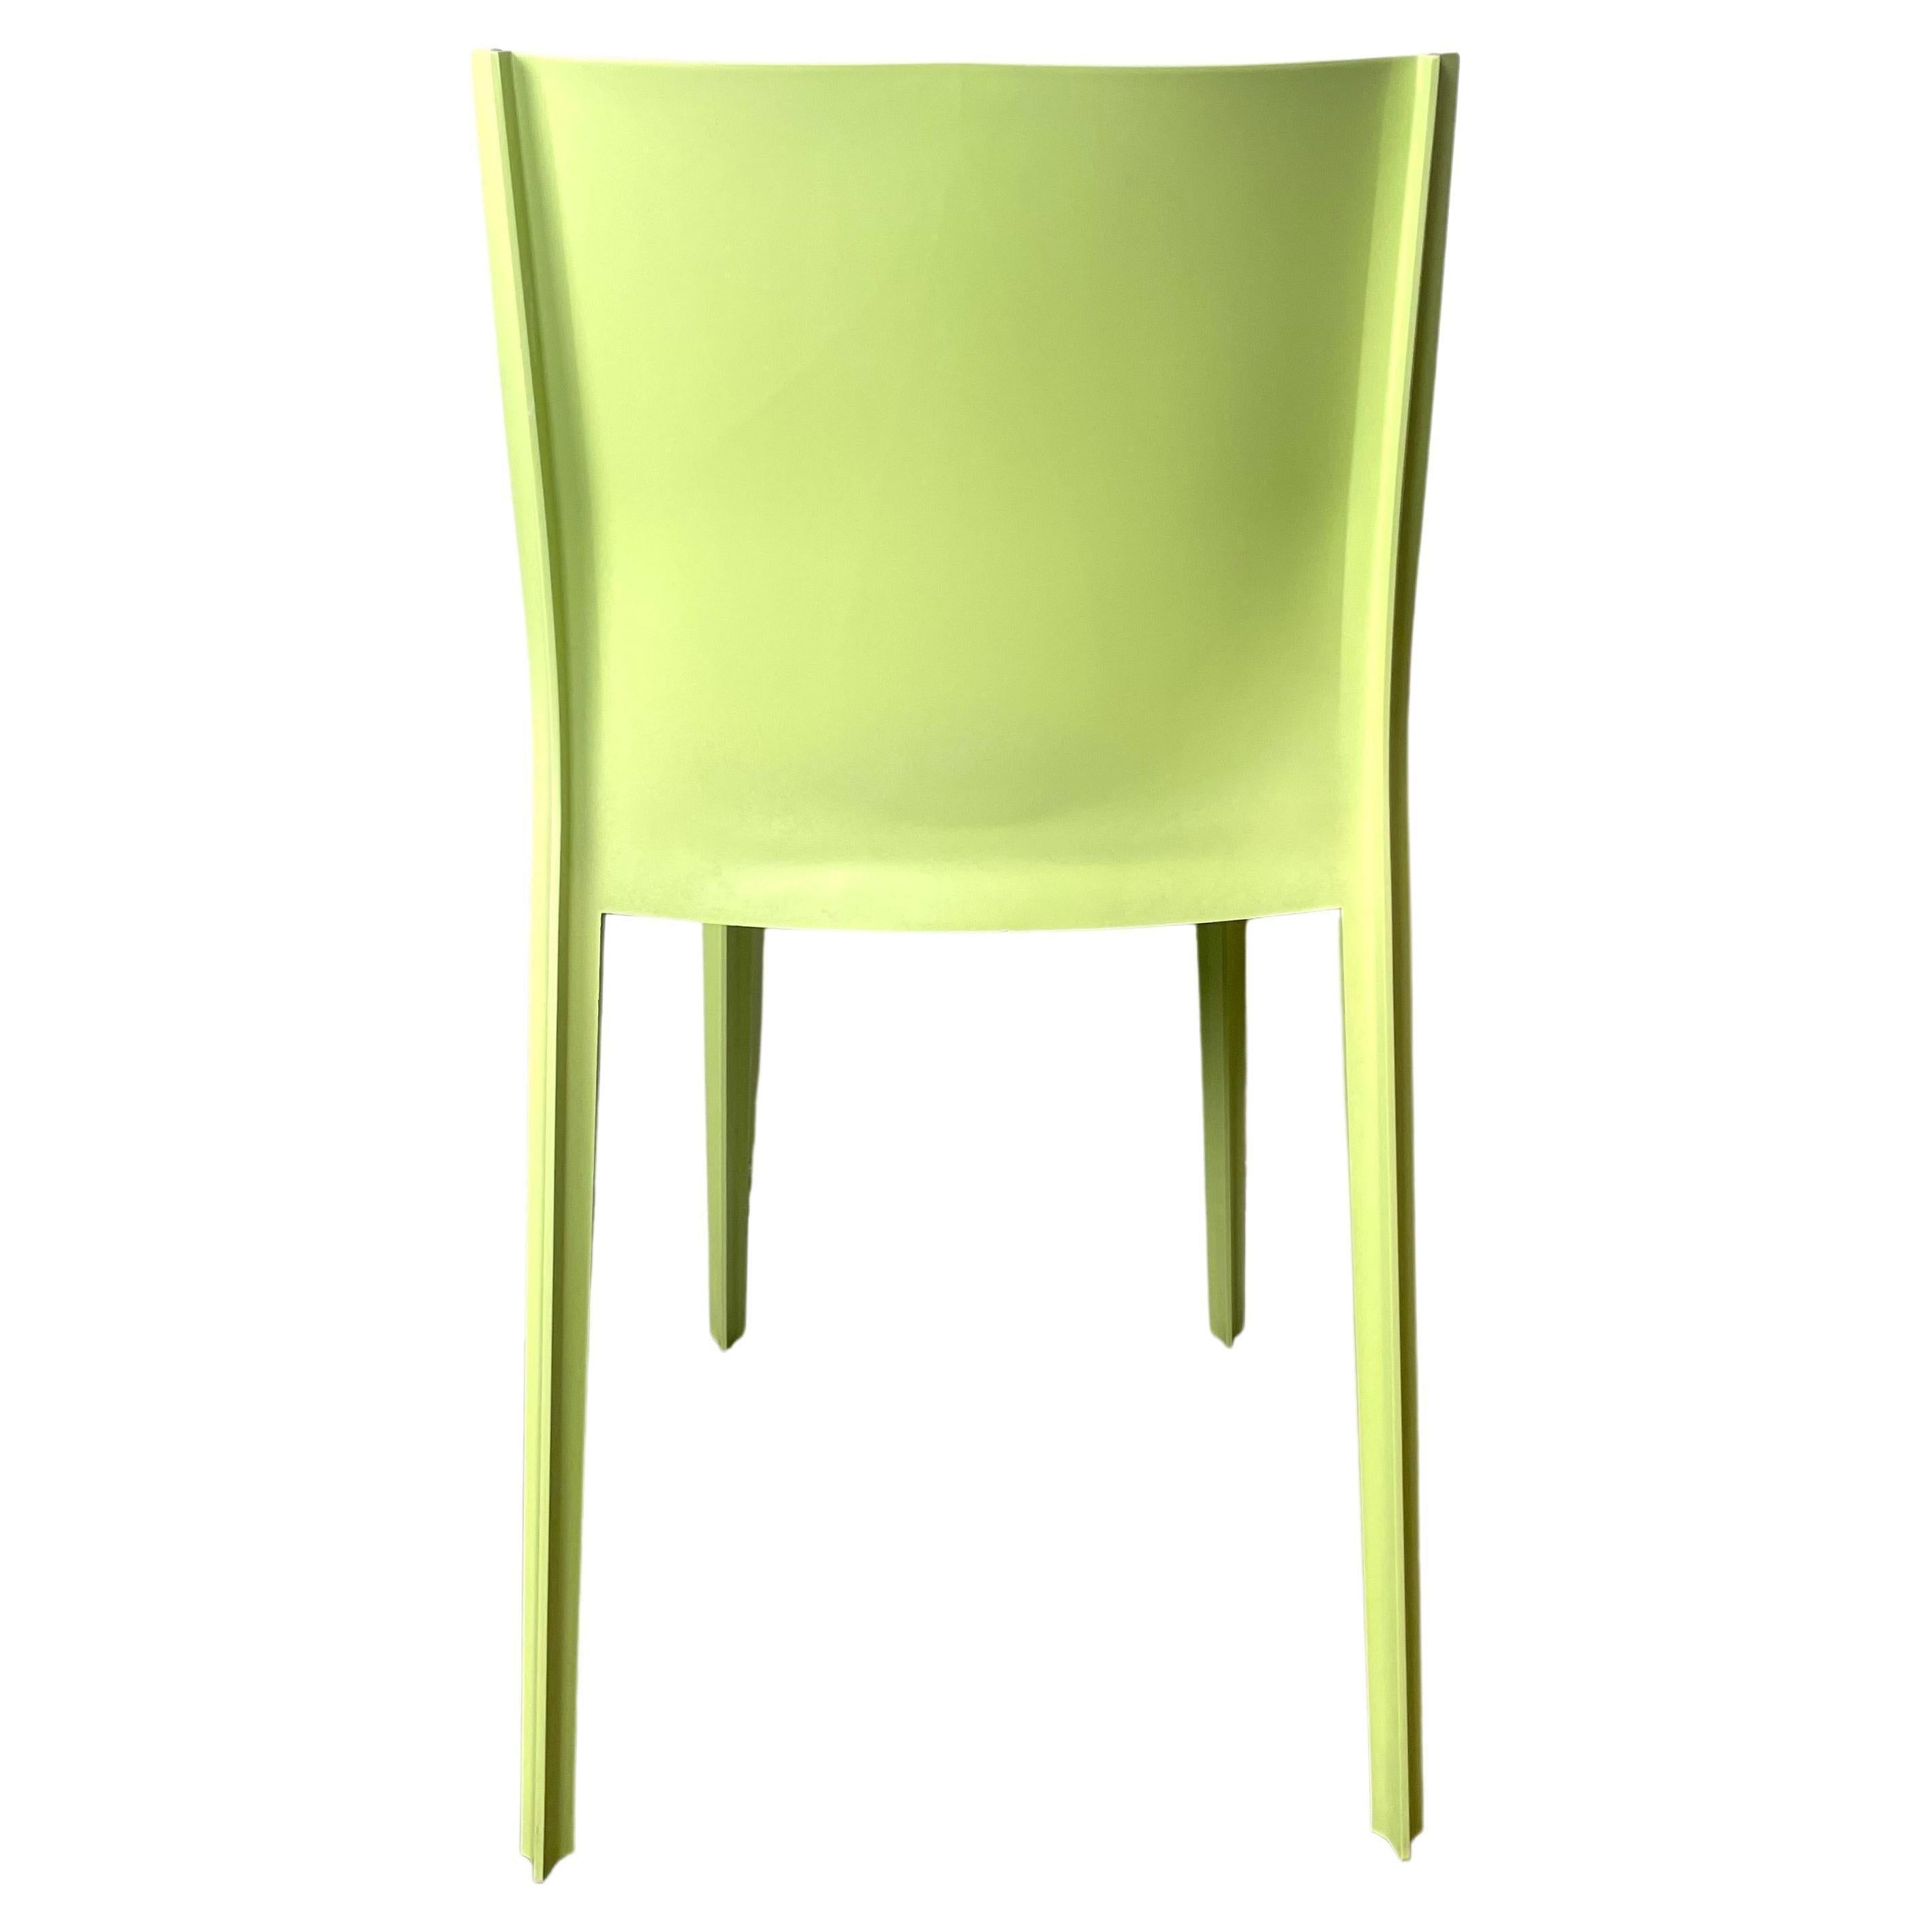 Philippe Starck, Set of 2 French Green Chairs, Design Slick Slick XO - France For Sale 2